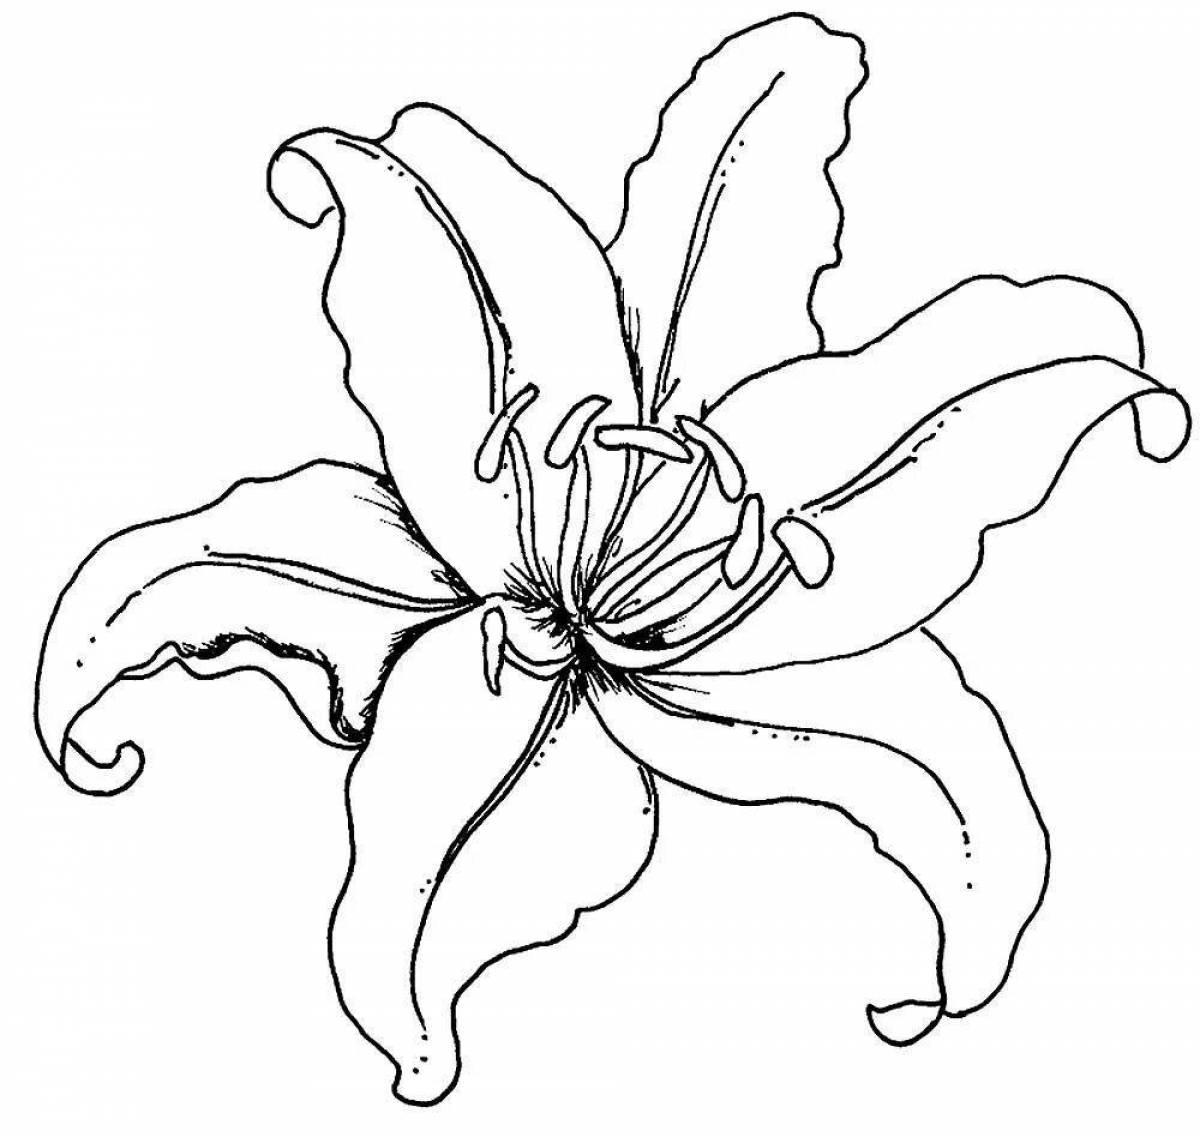 Little lily coloring pages for kids